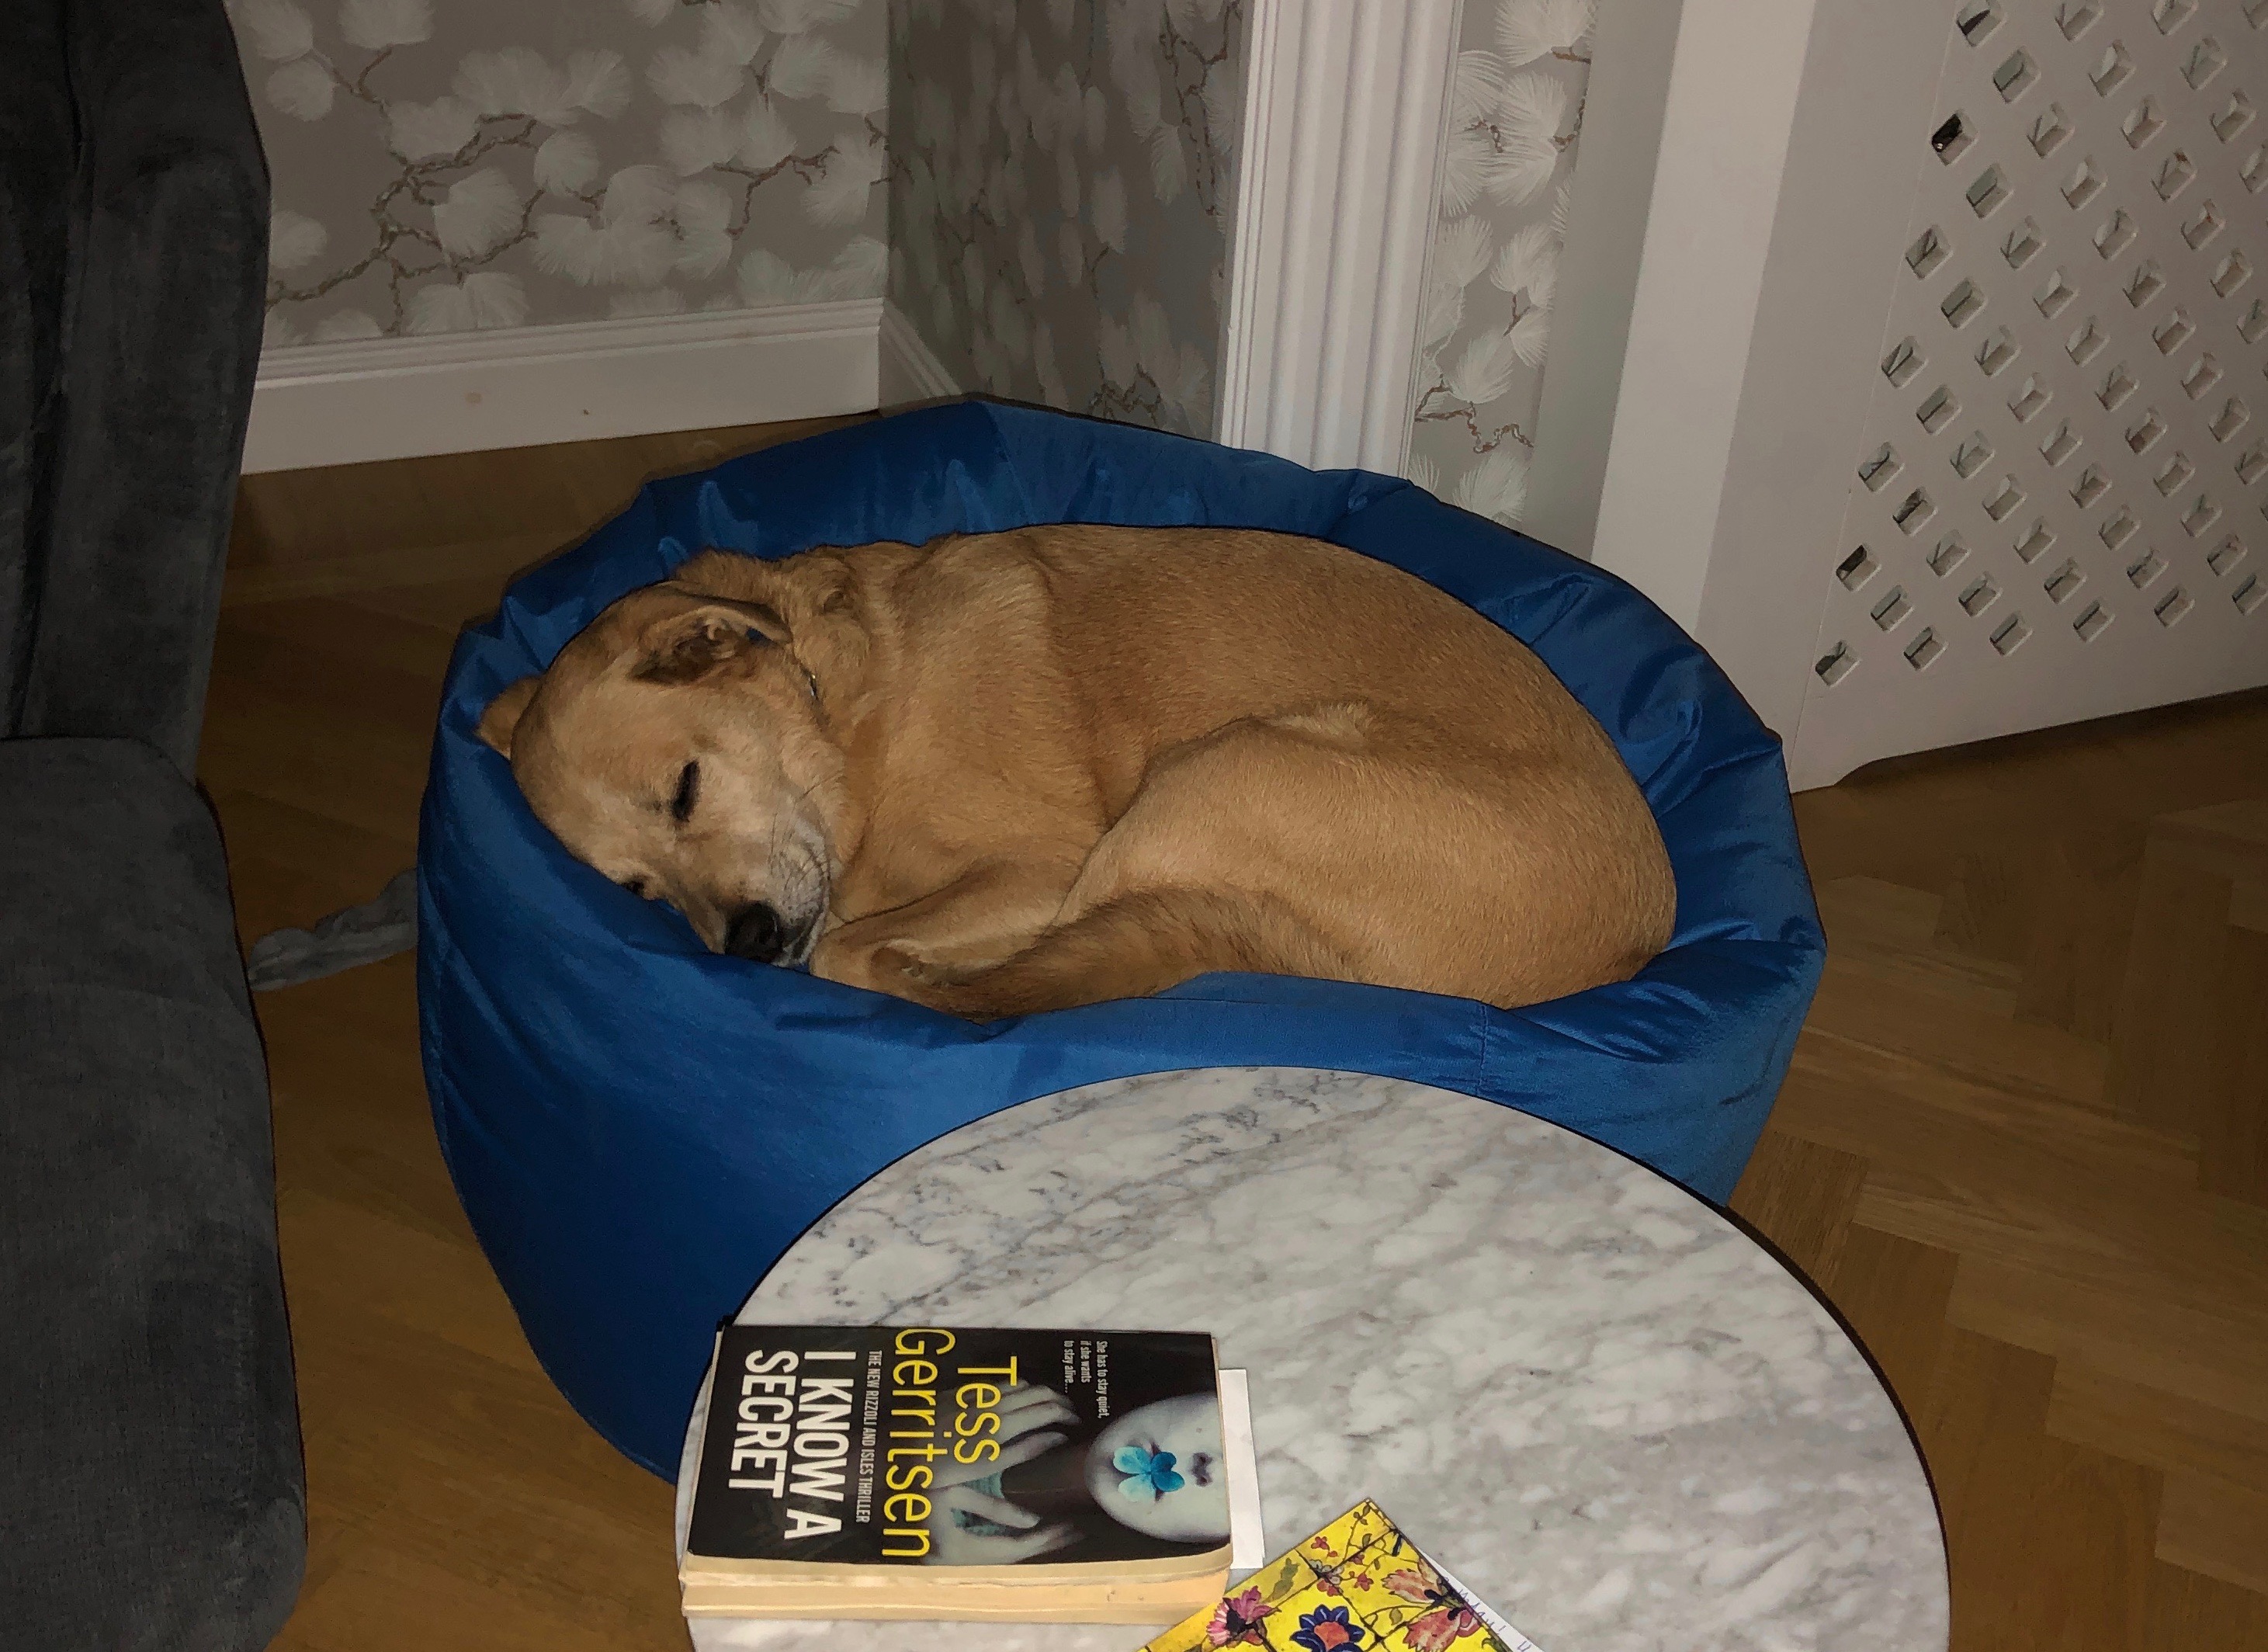 A yellow dog sleeps curled up in a beanbag chair